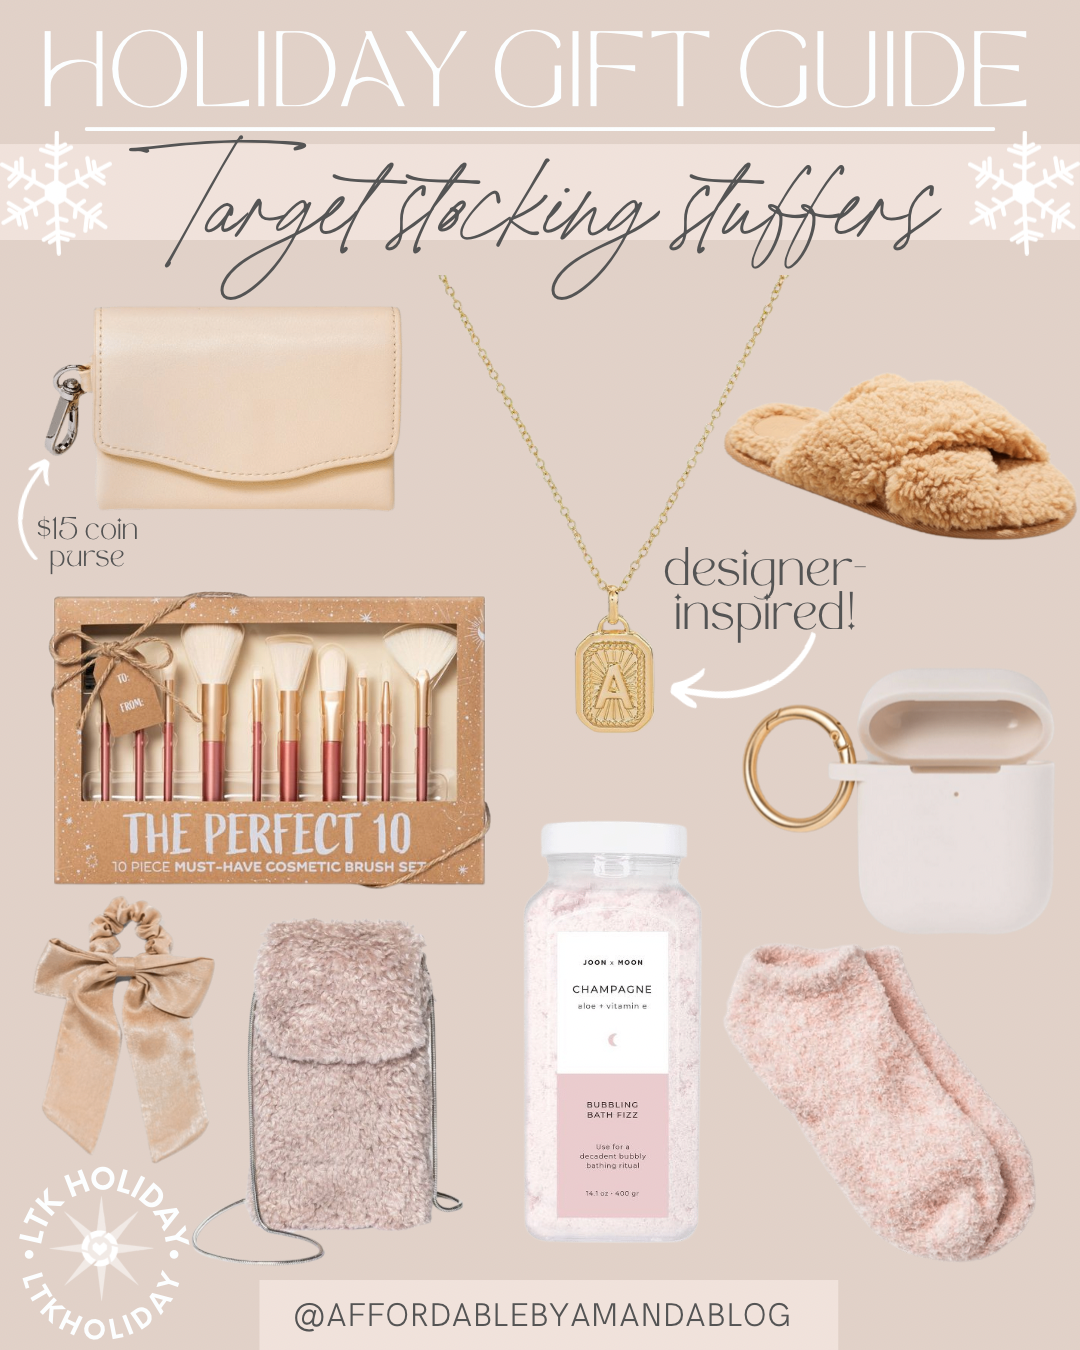 Target Stocking Stuffers for Her - Affordable by Amanda